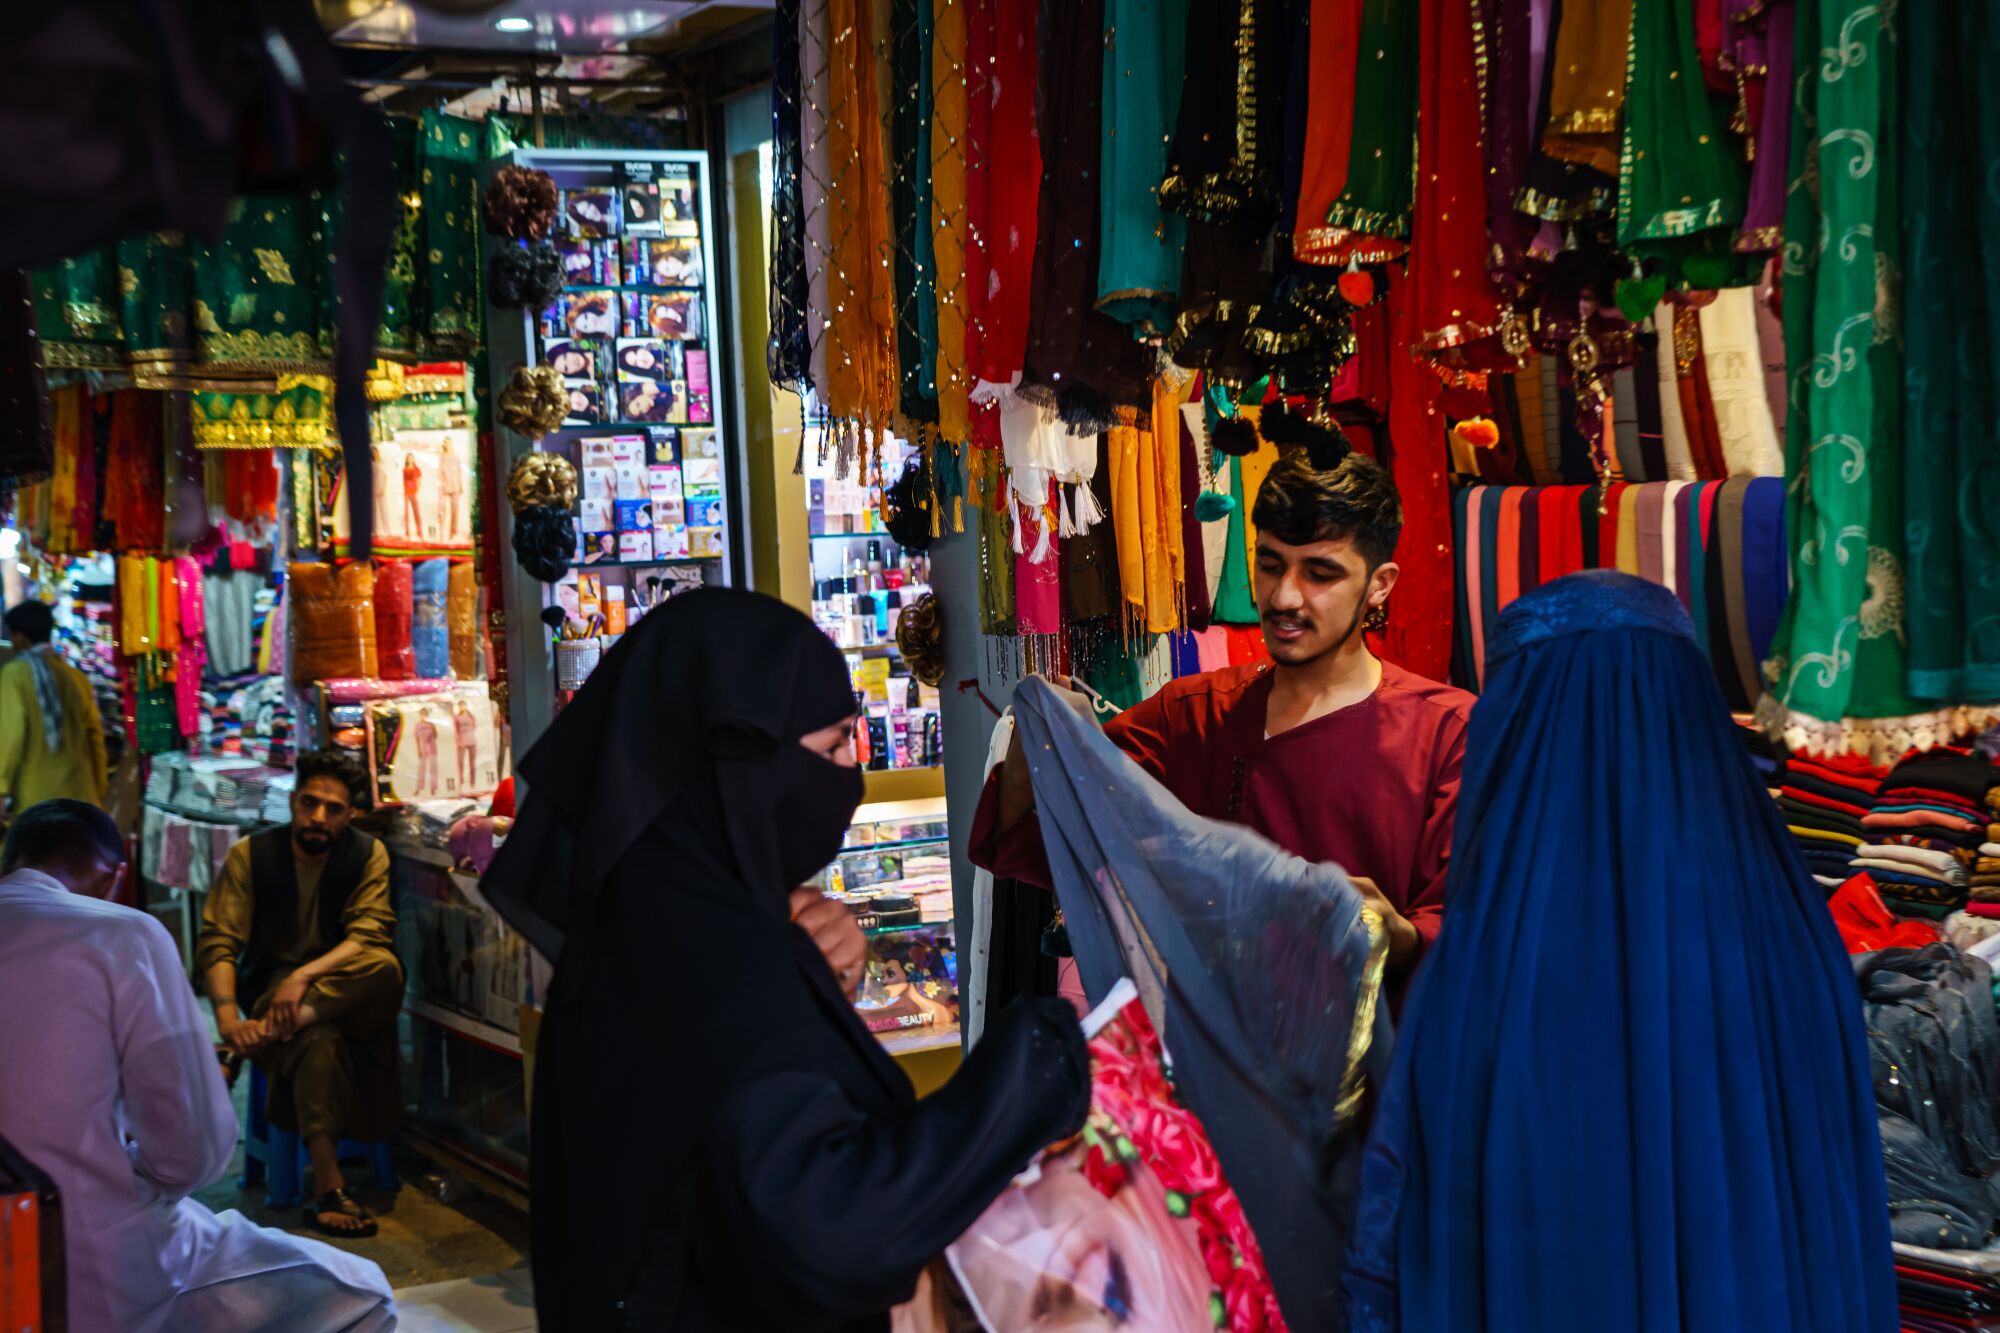 A shopkeeper shows his wares to the women shopping in the Lycee Maryam Bazaar in Kabul, Afghanistan.